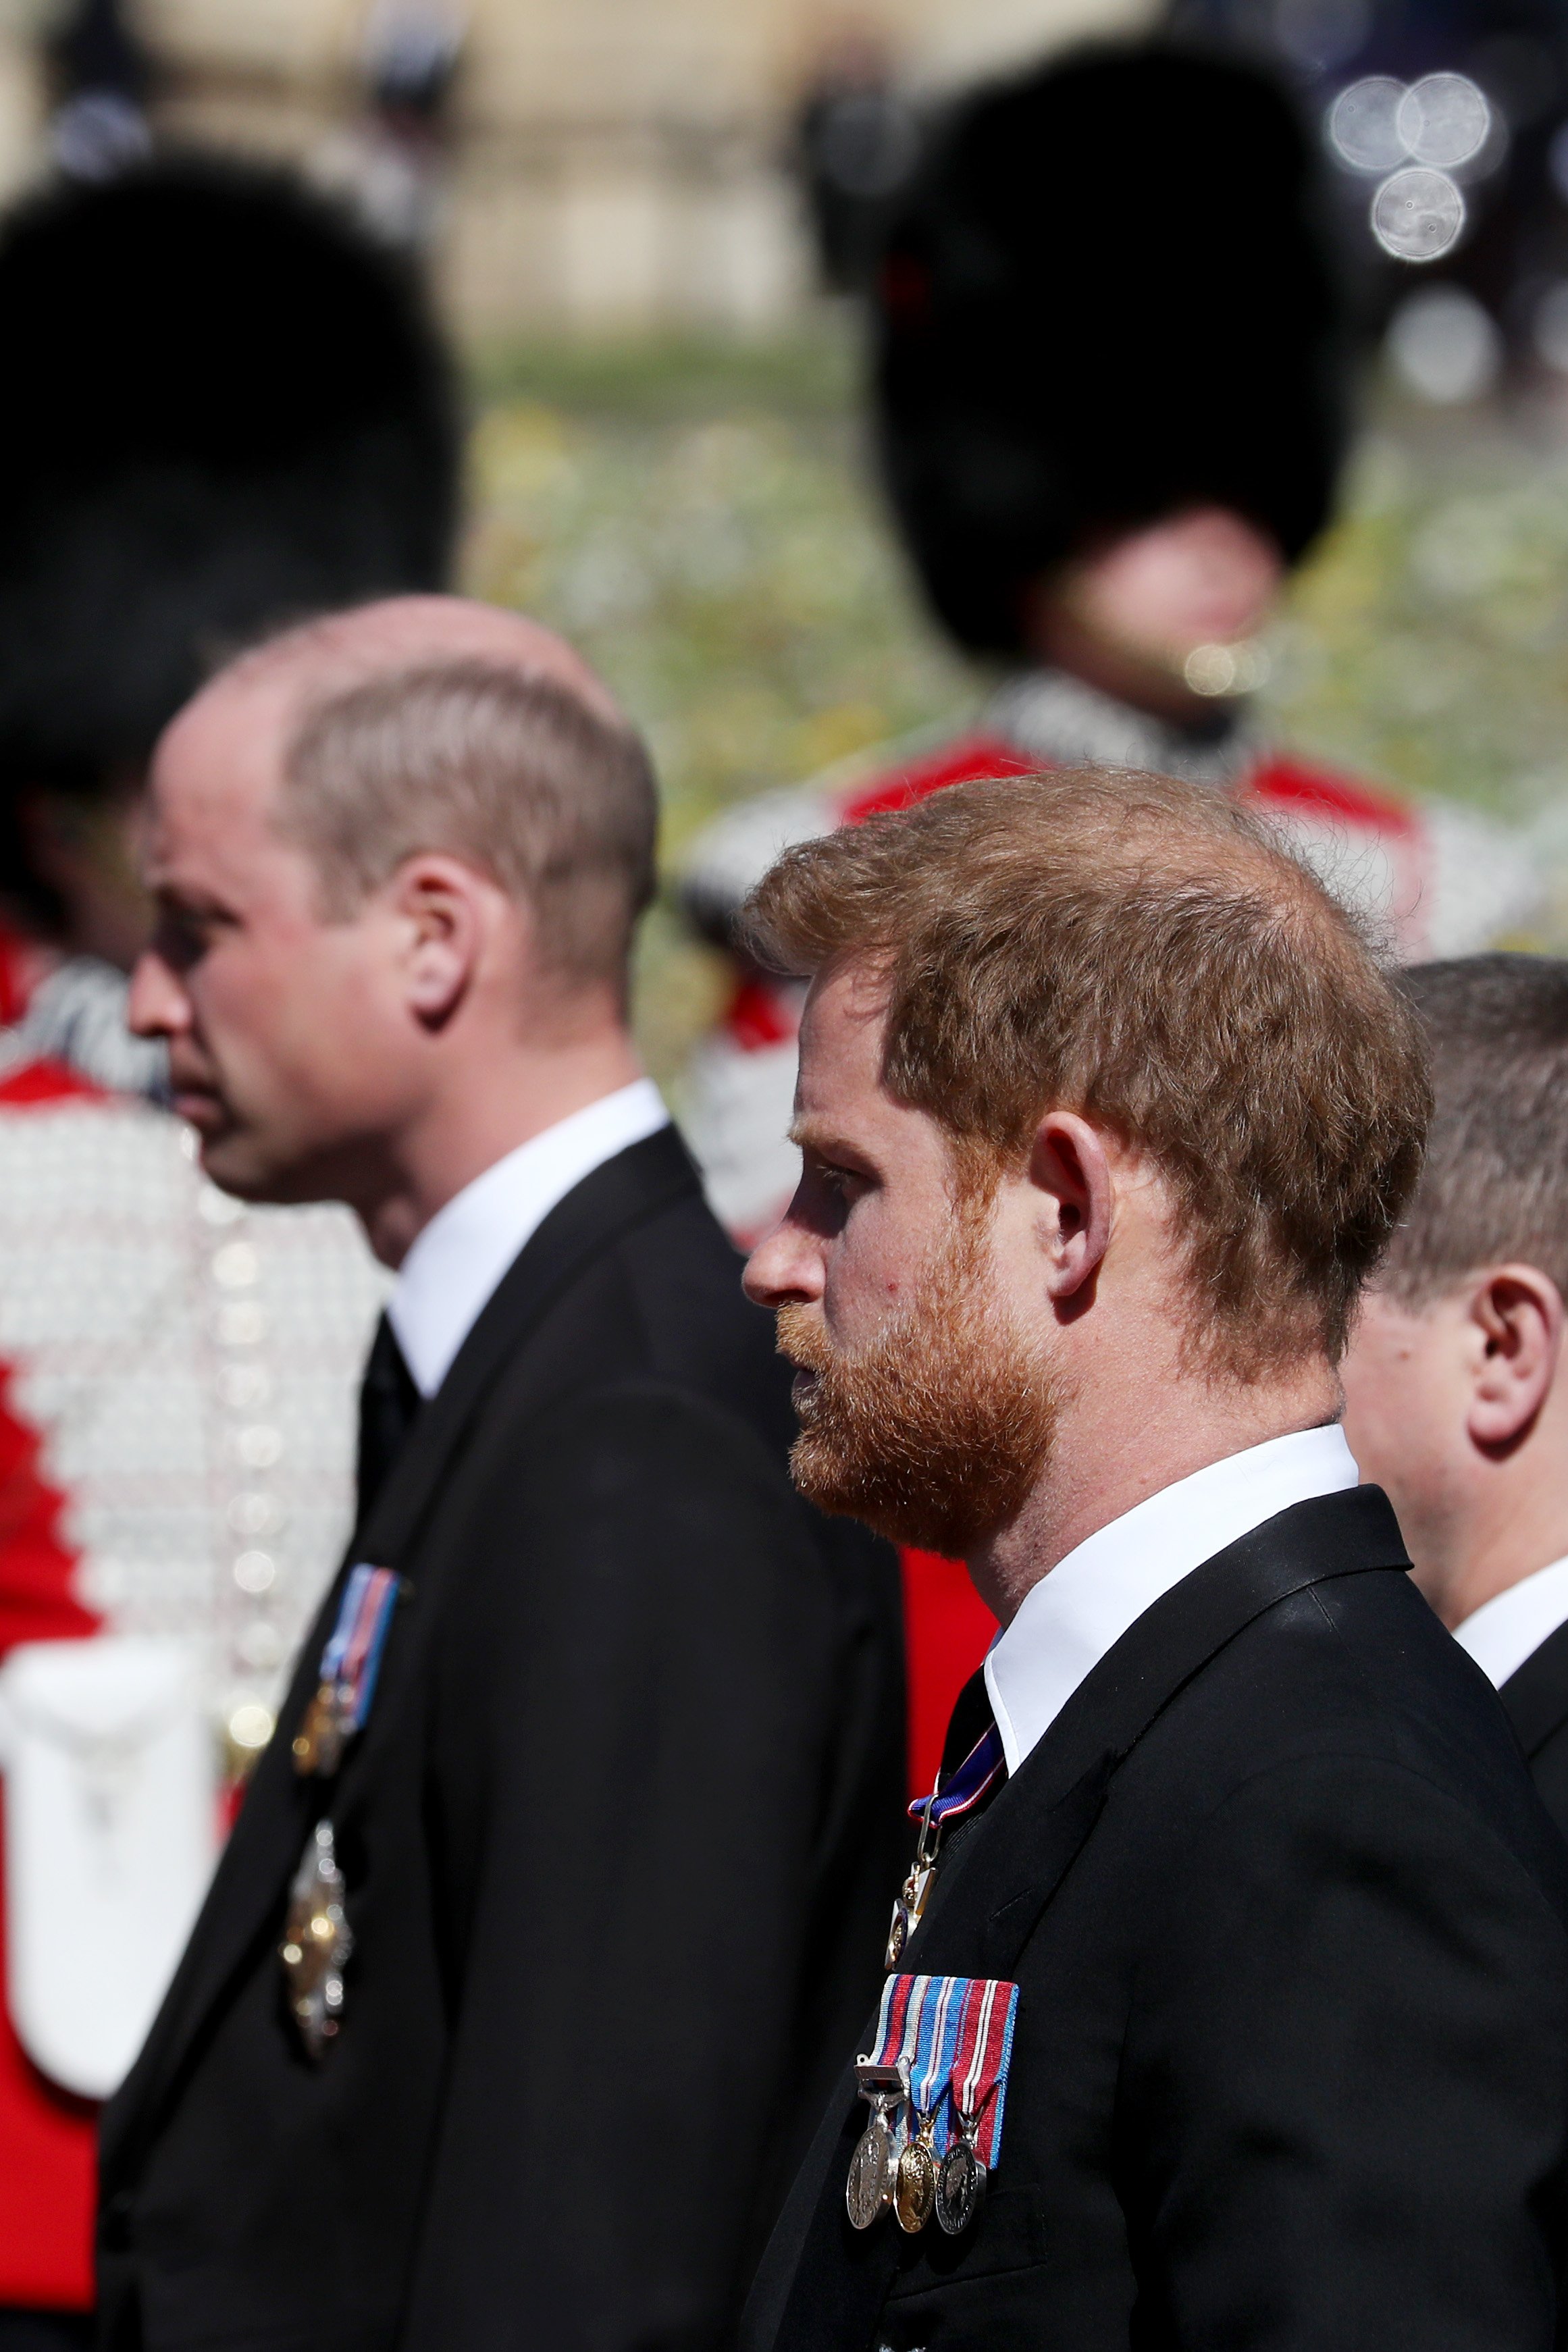 Prince William, Duke of Cambridge and Prince Harry, Duke of Sussex during the Ceremonial Procession during the funeral of Prince Philip, Duke of Edinburgh at Windsor Castle on April 17, 2021 in Windsor, England | Source: Getty Images